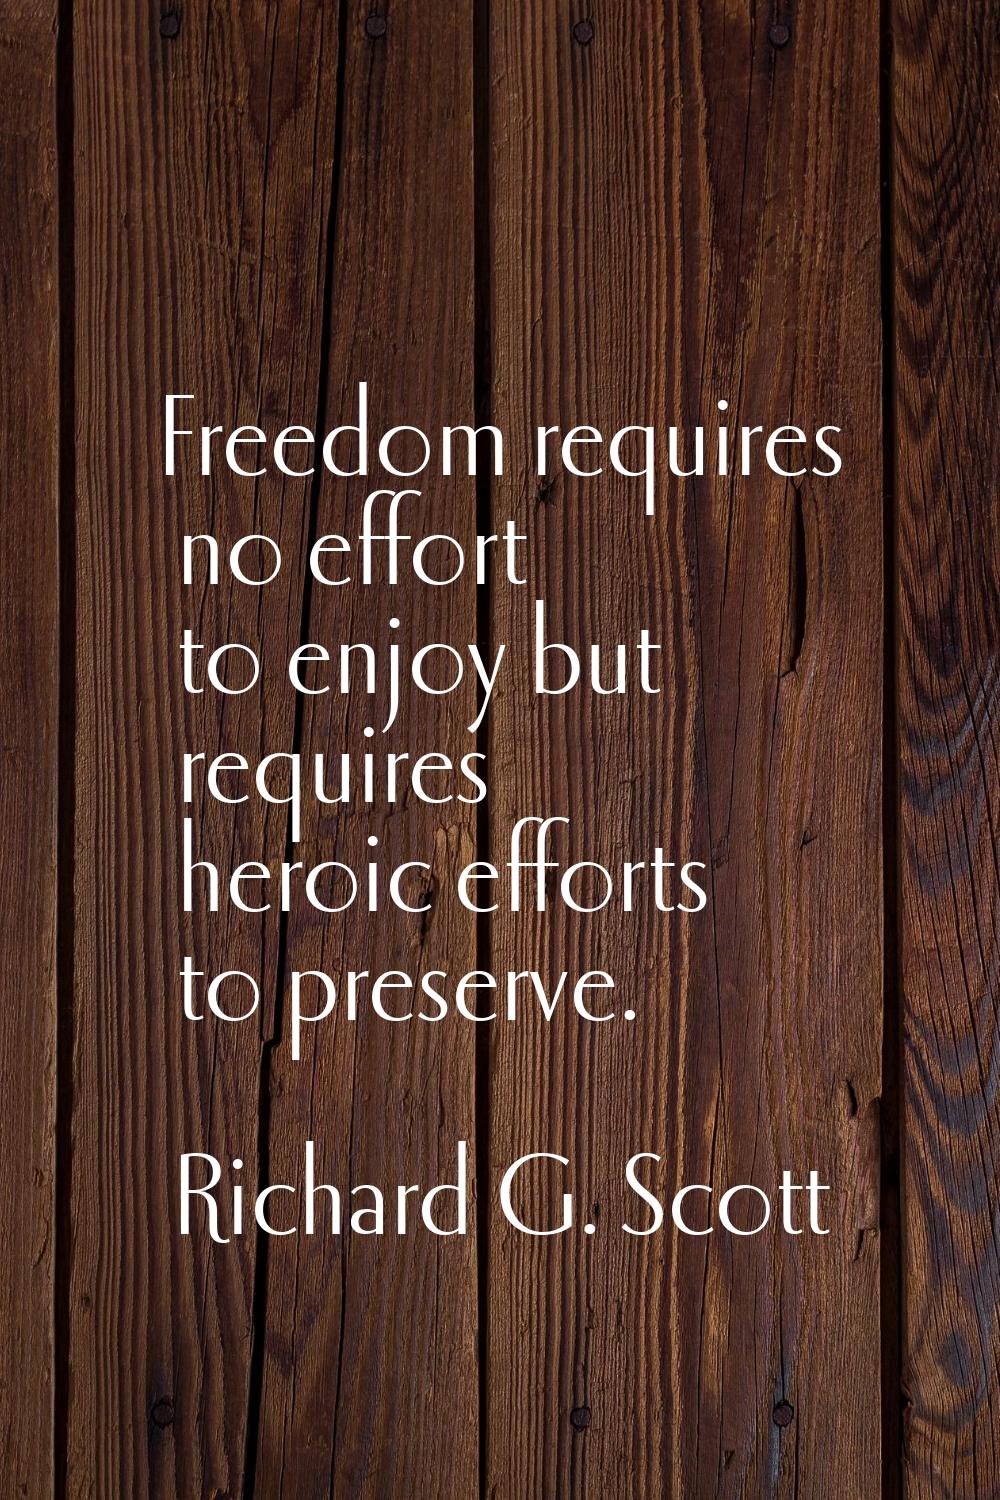 Freedom requires no effort to enjoy but requires heroic efforts to preserve.